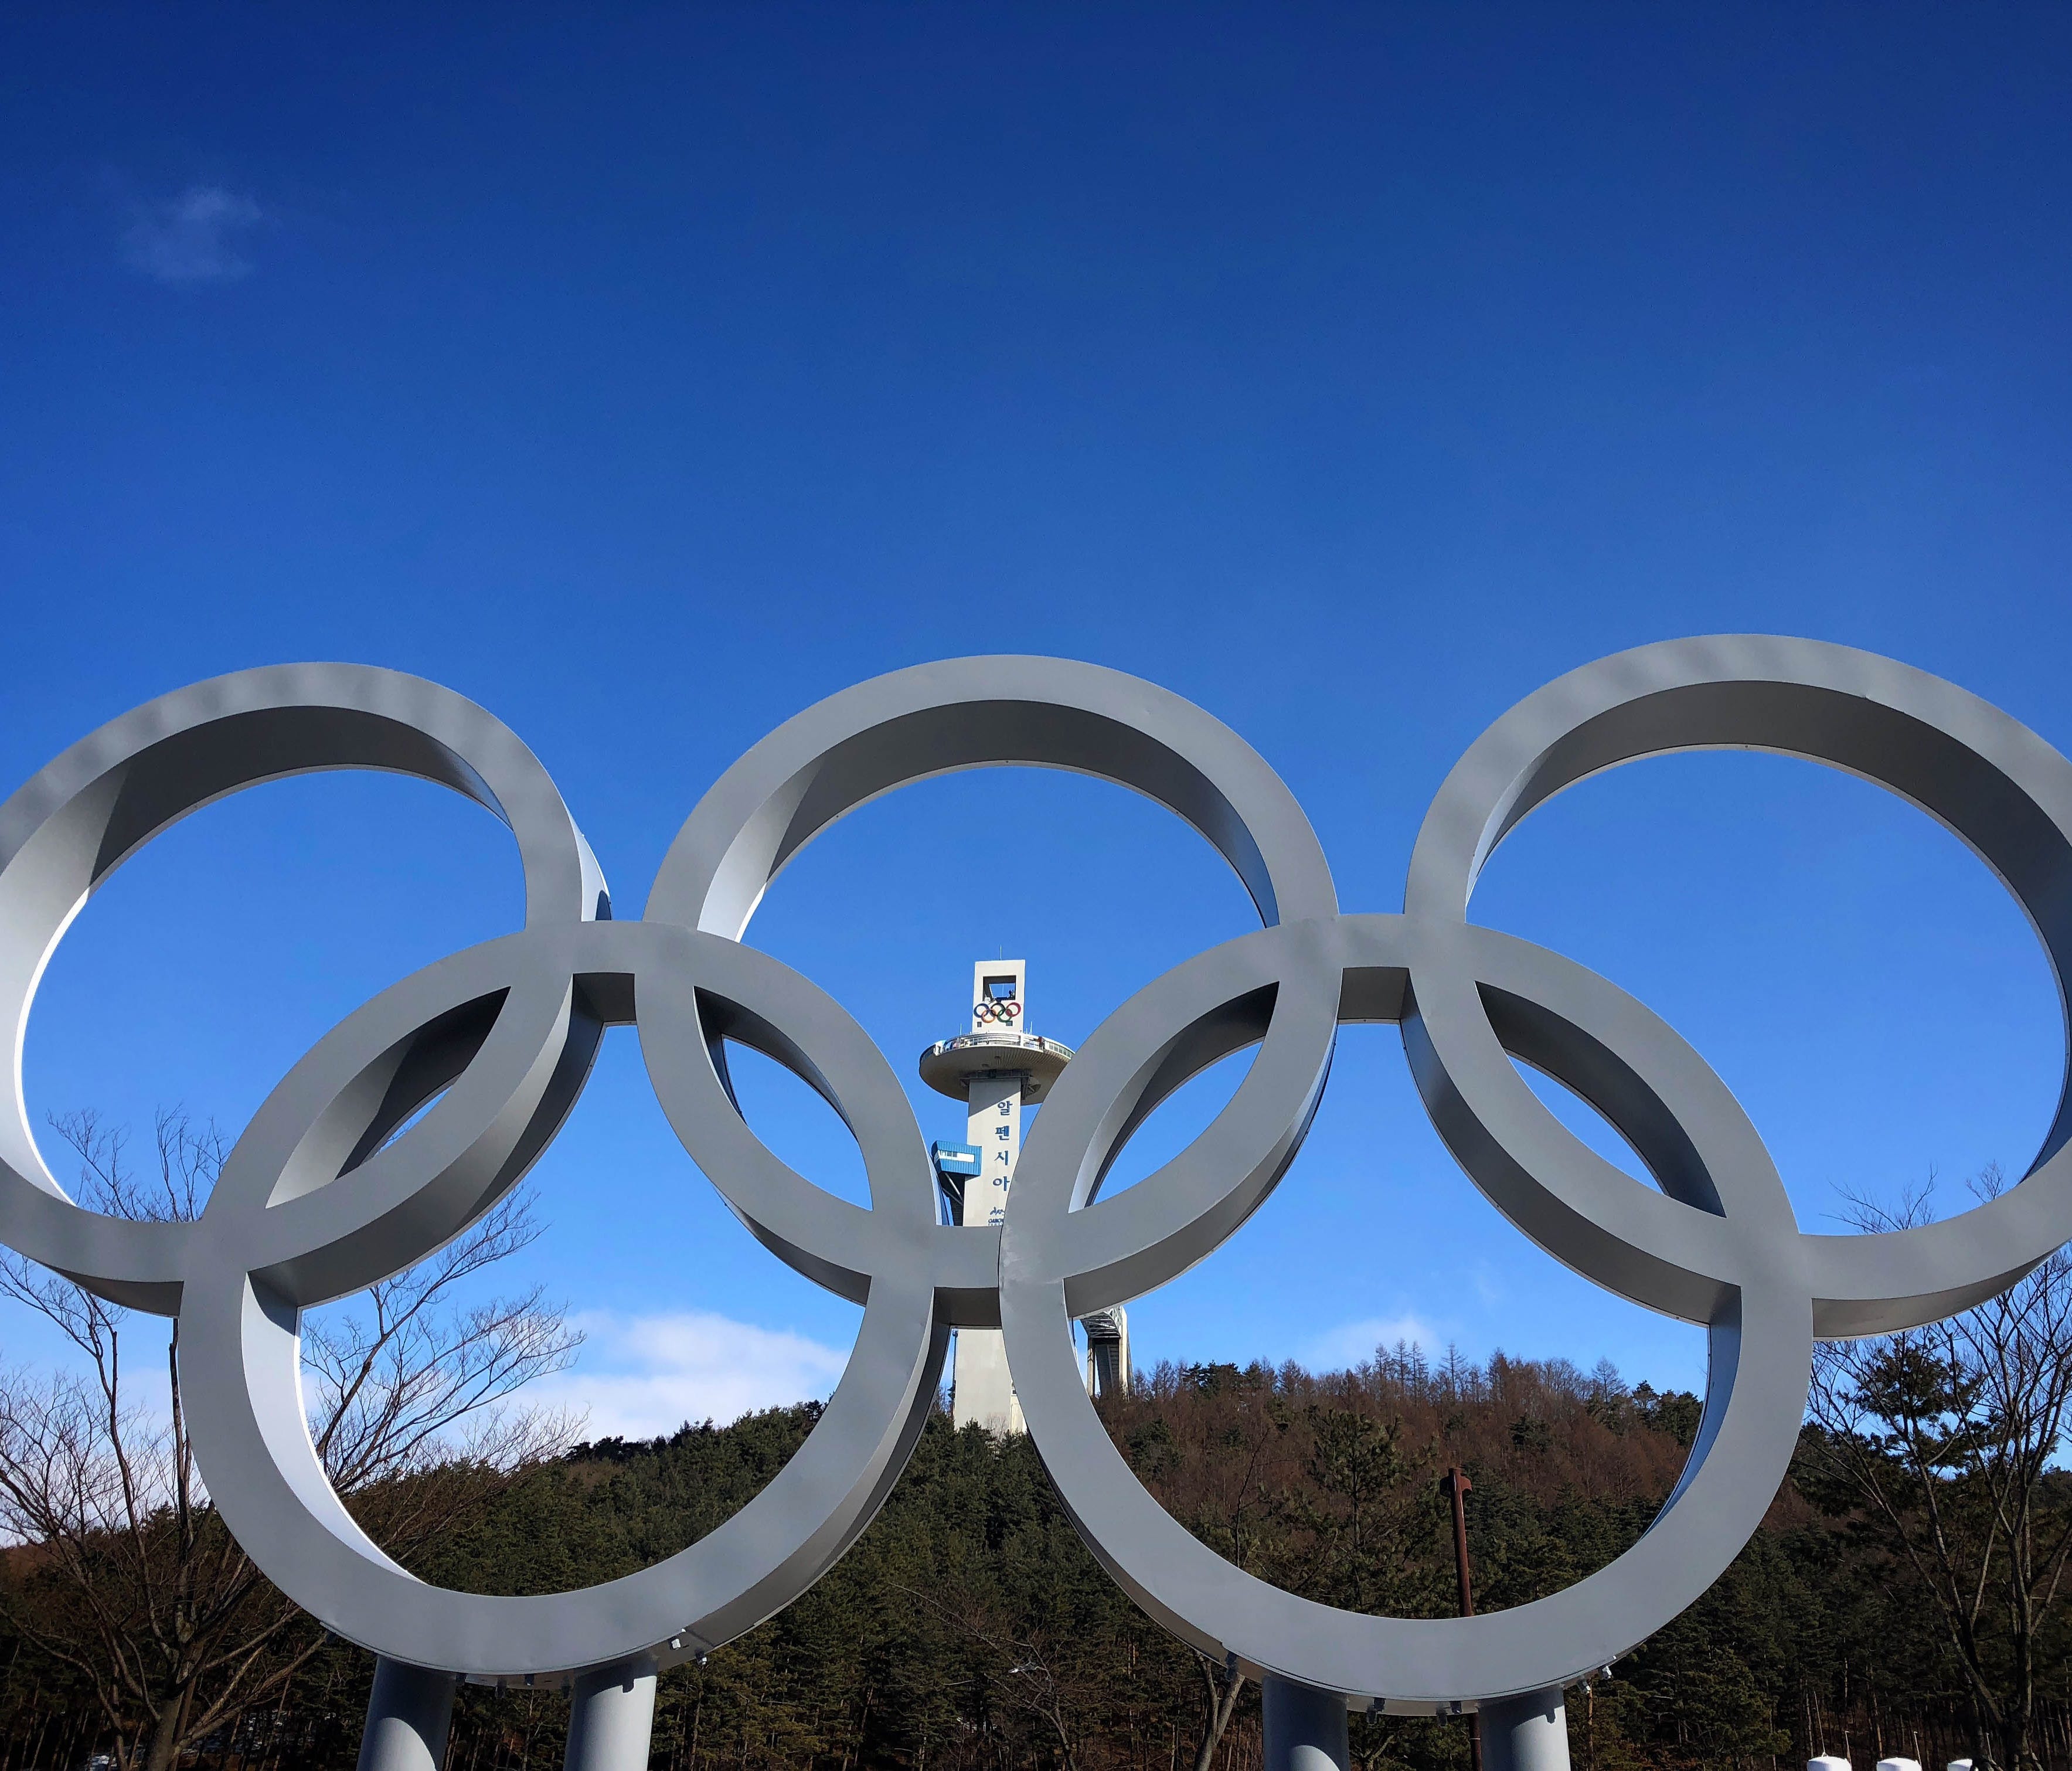 The Olympic rings and the Alpensia Ski Jumping Center are seen in the distance near the Main Press Center in advance of the PyeongChang 2018 Olympic Winter Games.